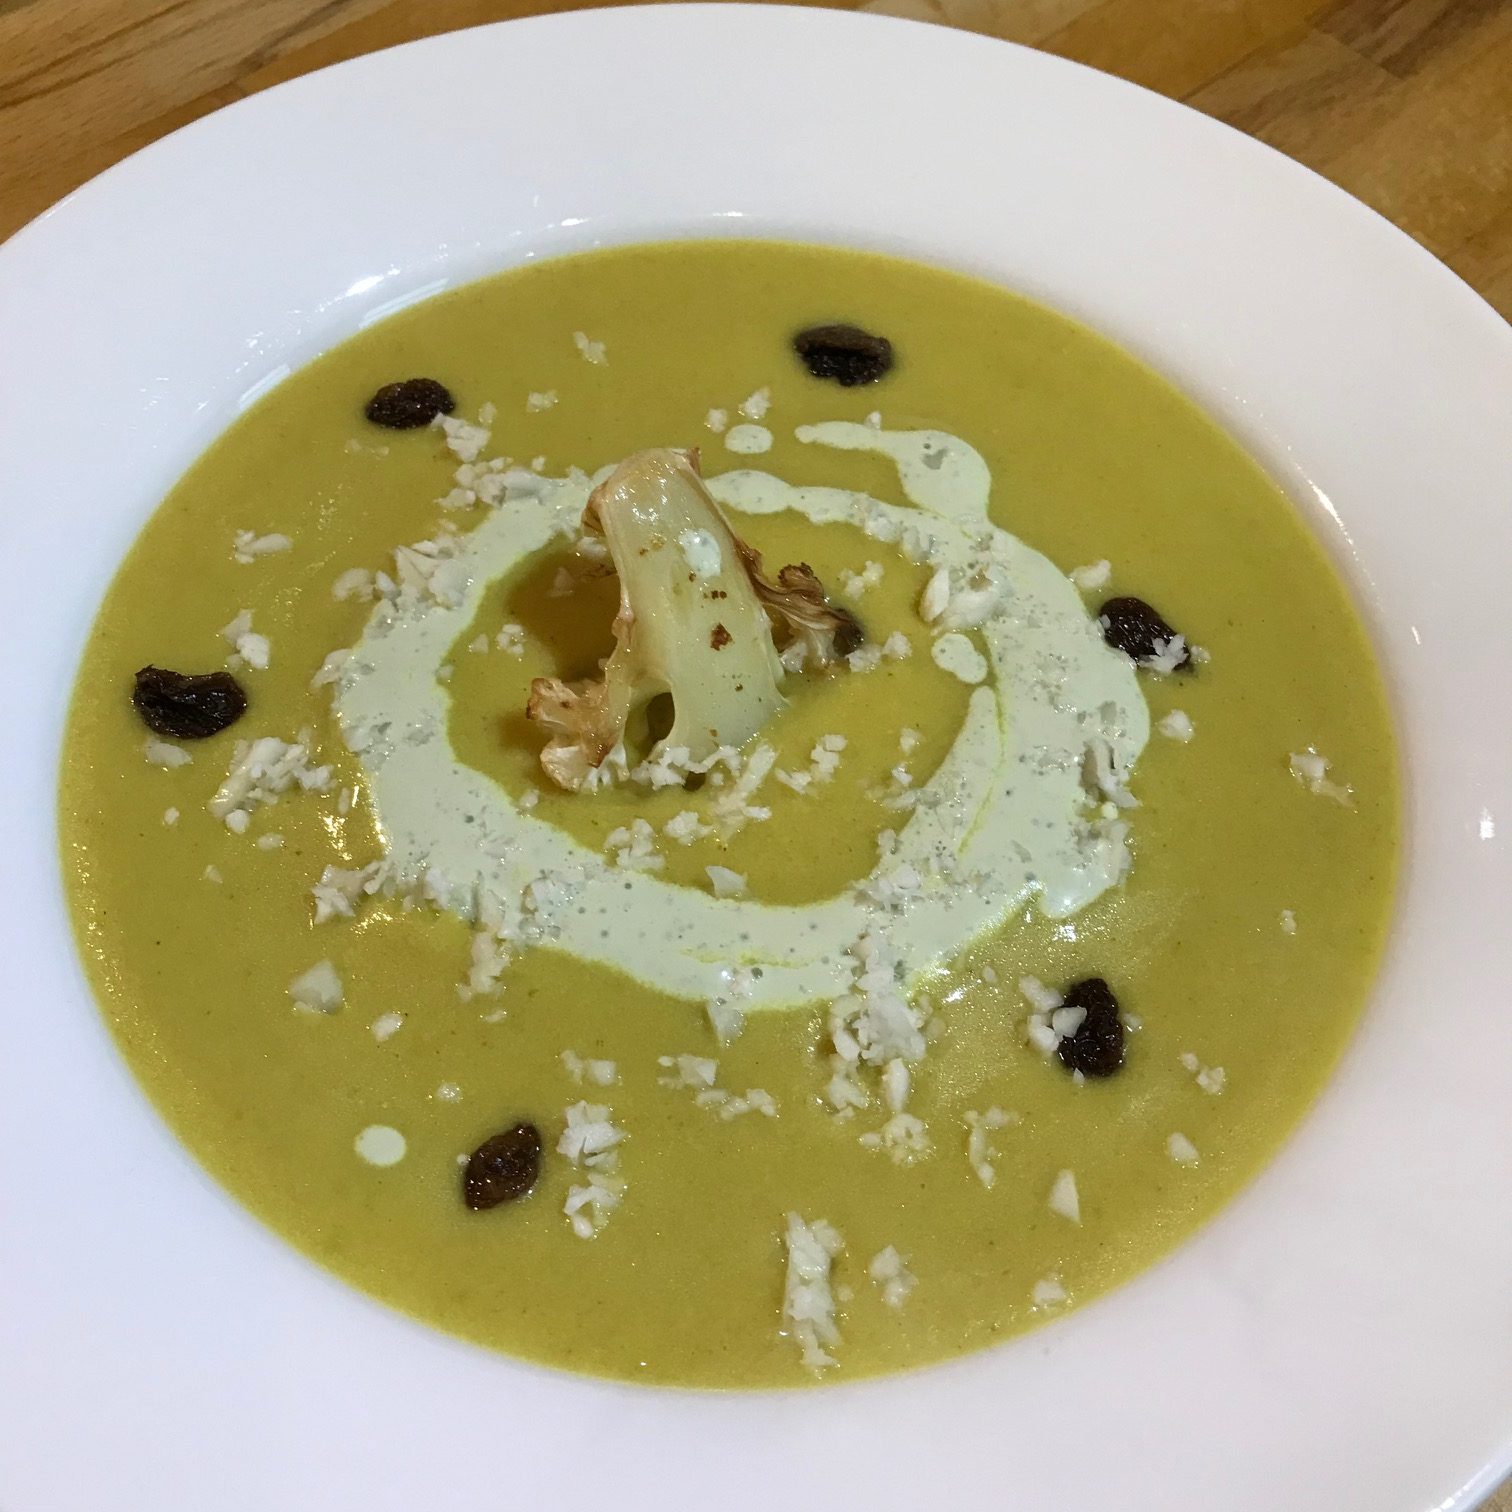 20190809 - Spiced Cauliflower Soup with Roasted Cauliflower and Cauliflower Cous Cous